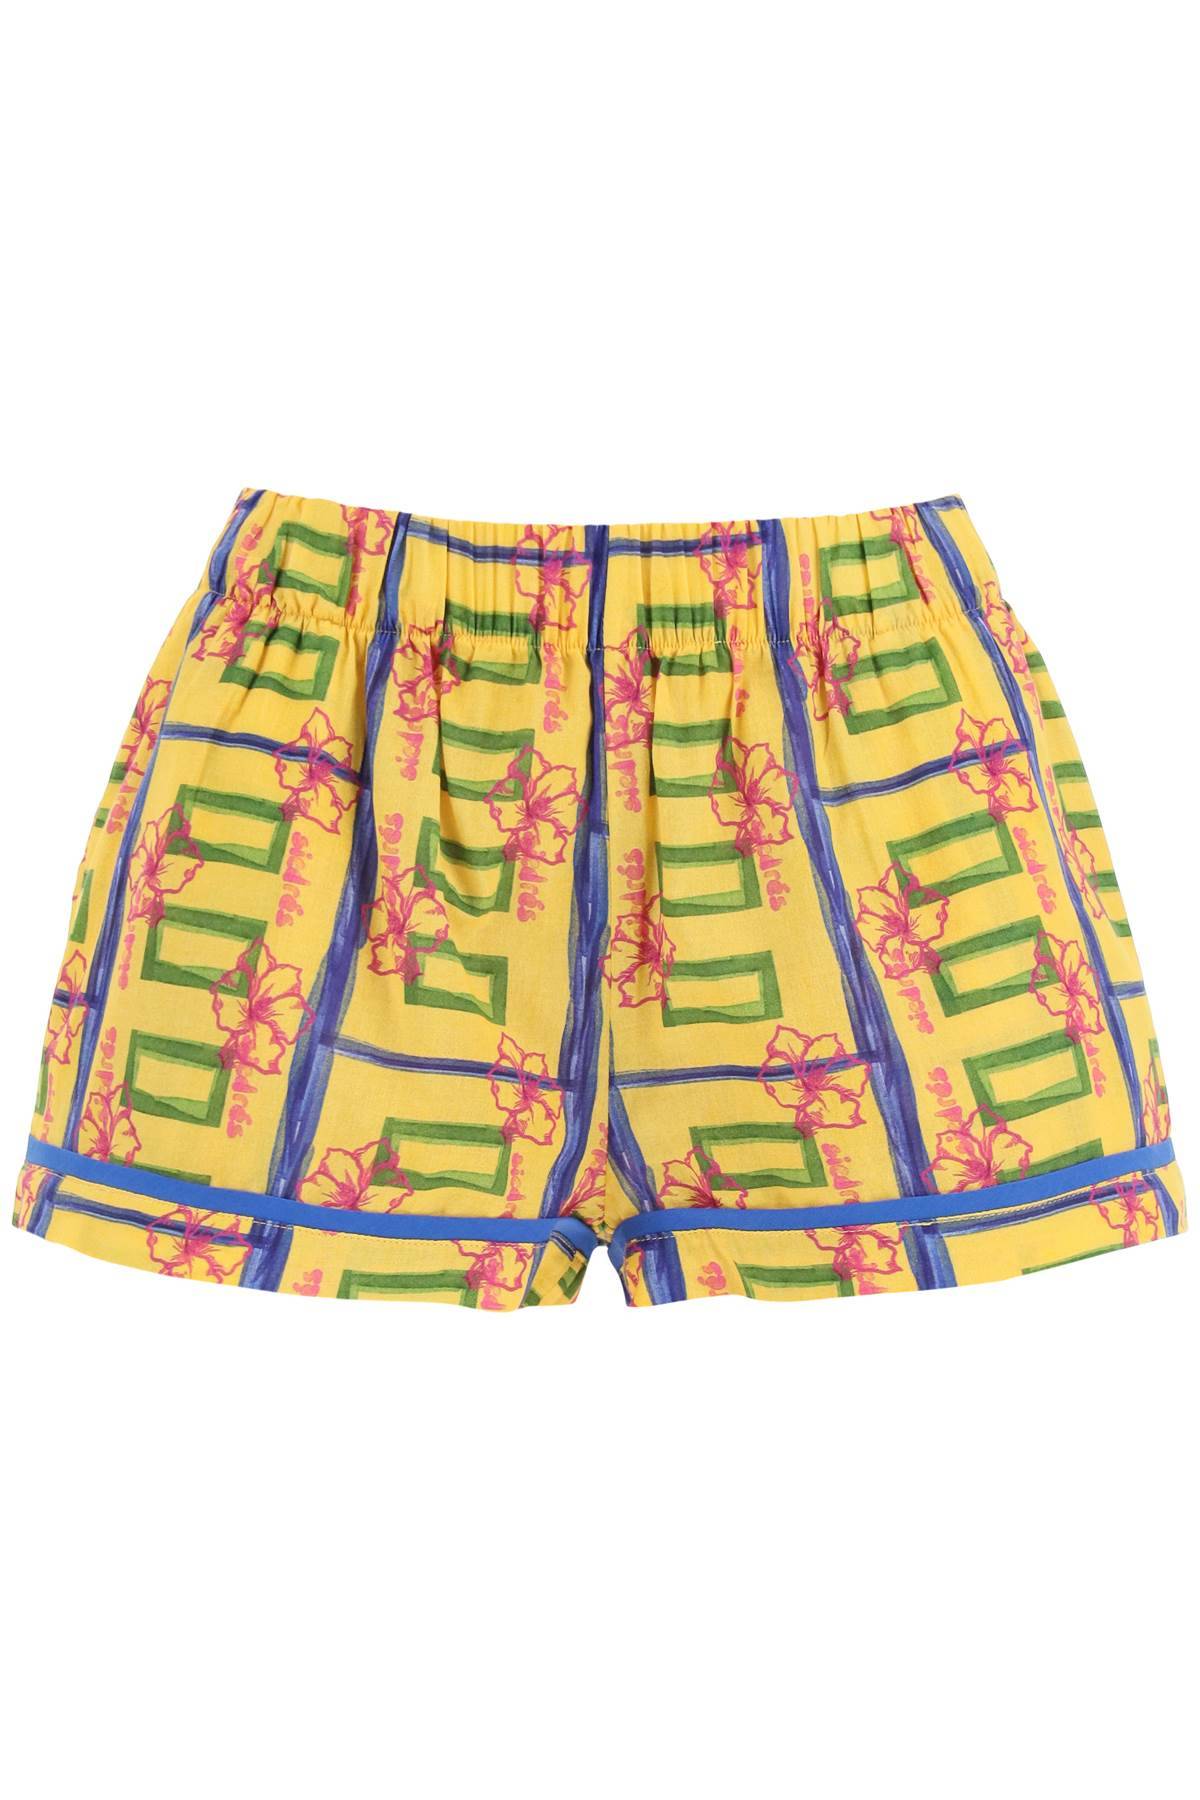 SIEDRES SIEDRES all-over printed cotton 'zyon' shorts